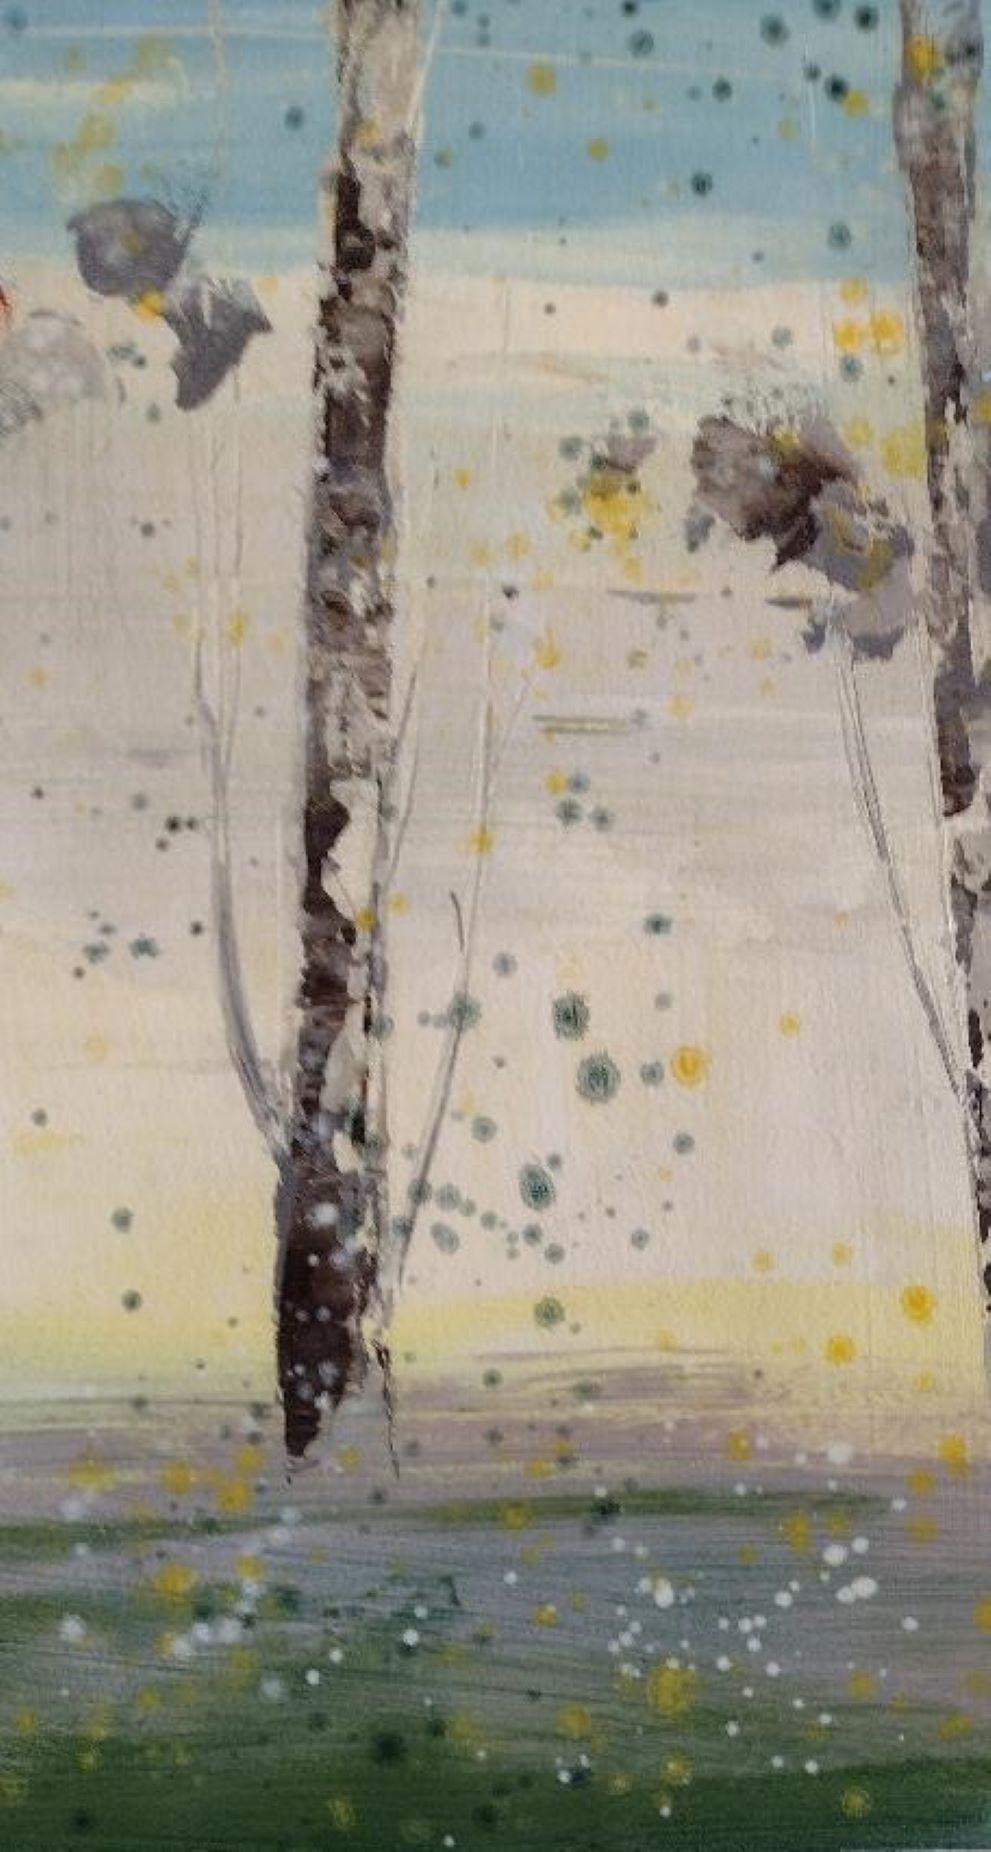 Playful Birch trees appear to be moving slightly on a clear fresh fall day.

Artist bio:
Cecil K. was born in Uzbekistan in 1963. His first artistic experience was in sixth grade sketching a horse and from that day on, sketching with pencil was one